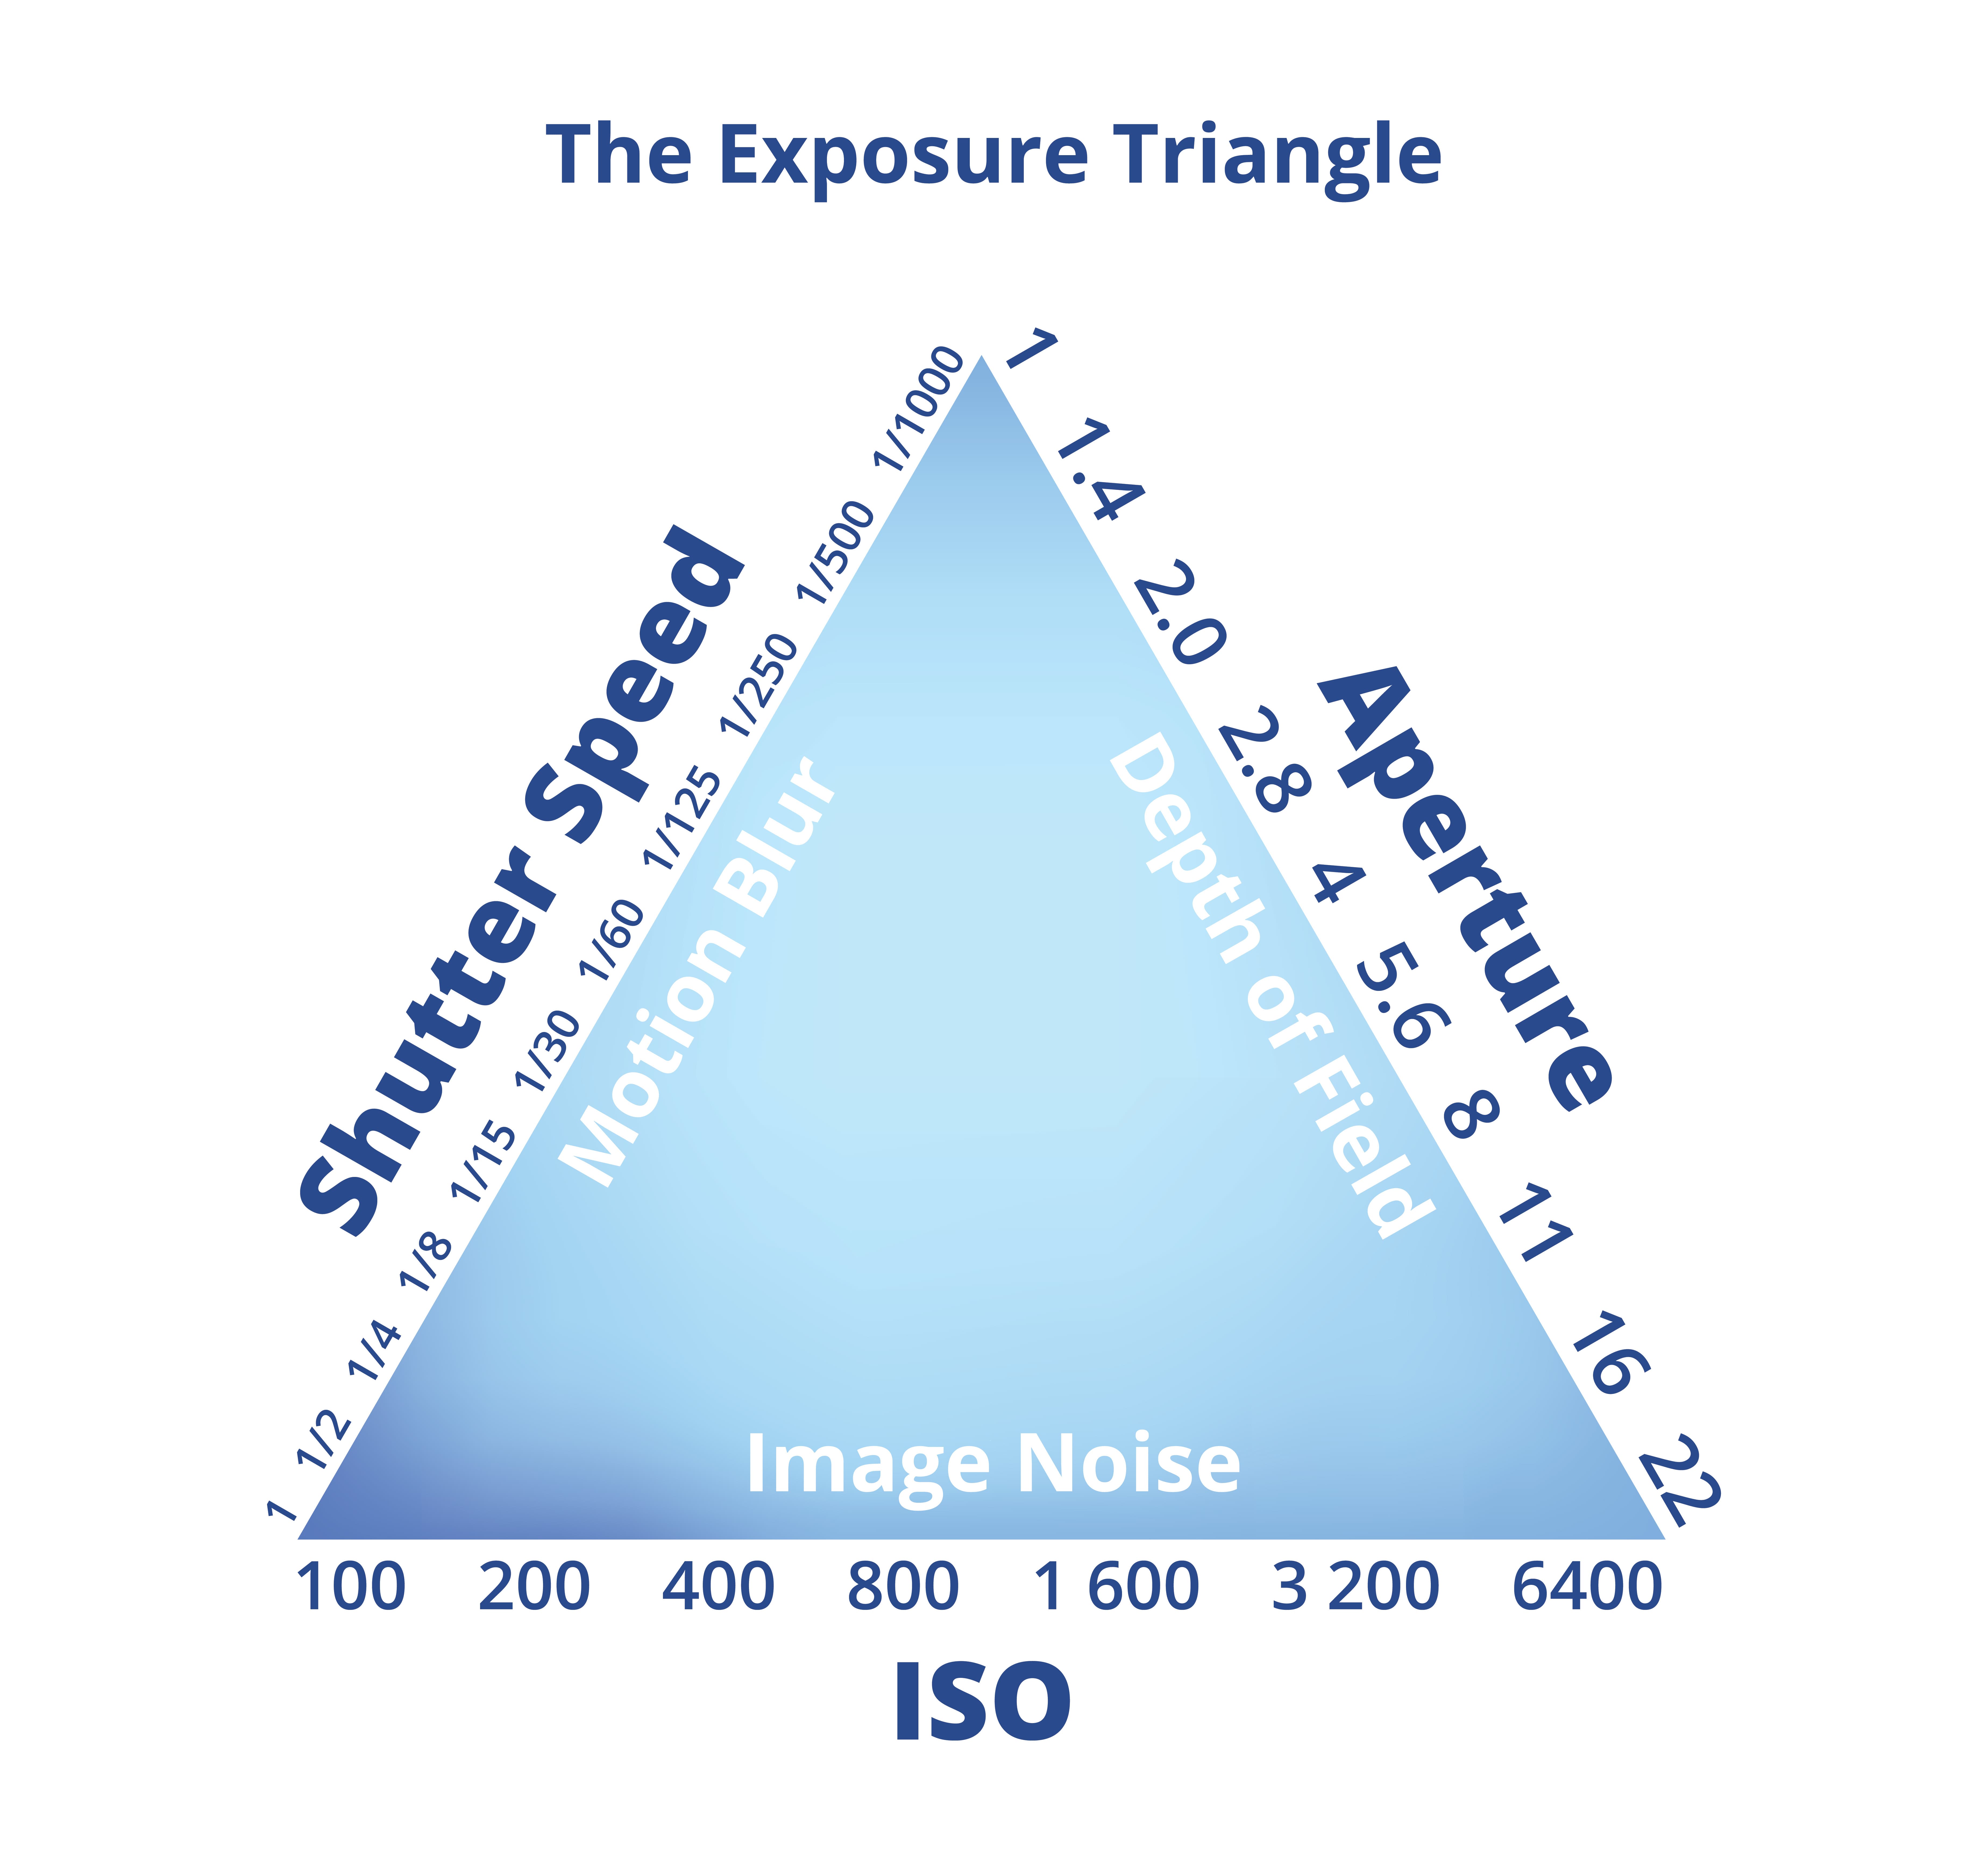 Exposure triangle graphic to help understand aperture, ISO, and shutter speed